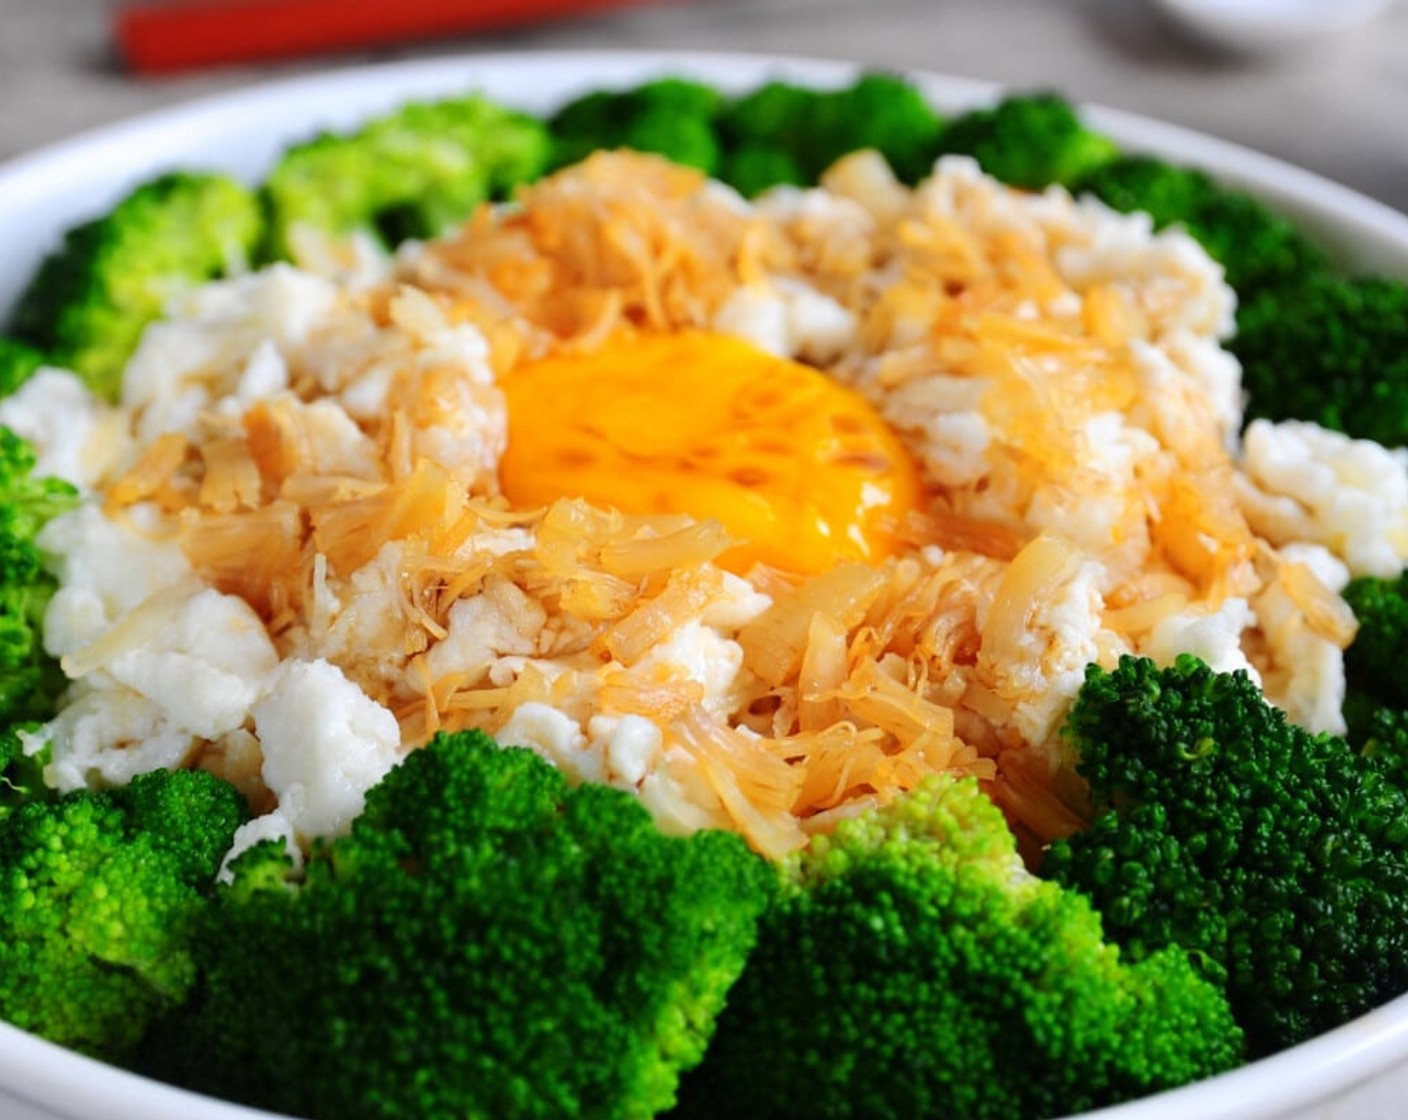 step 9 Place the soft egg whites in the middle of the broccoli ring, add Egg (1) in the center, and sprinkle fried dried scallop over the top. Serve drizzled with aromatic black or red vinegar over it. It can be eaten as is or with steamed rice.